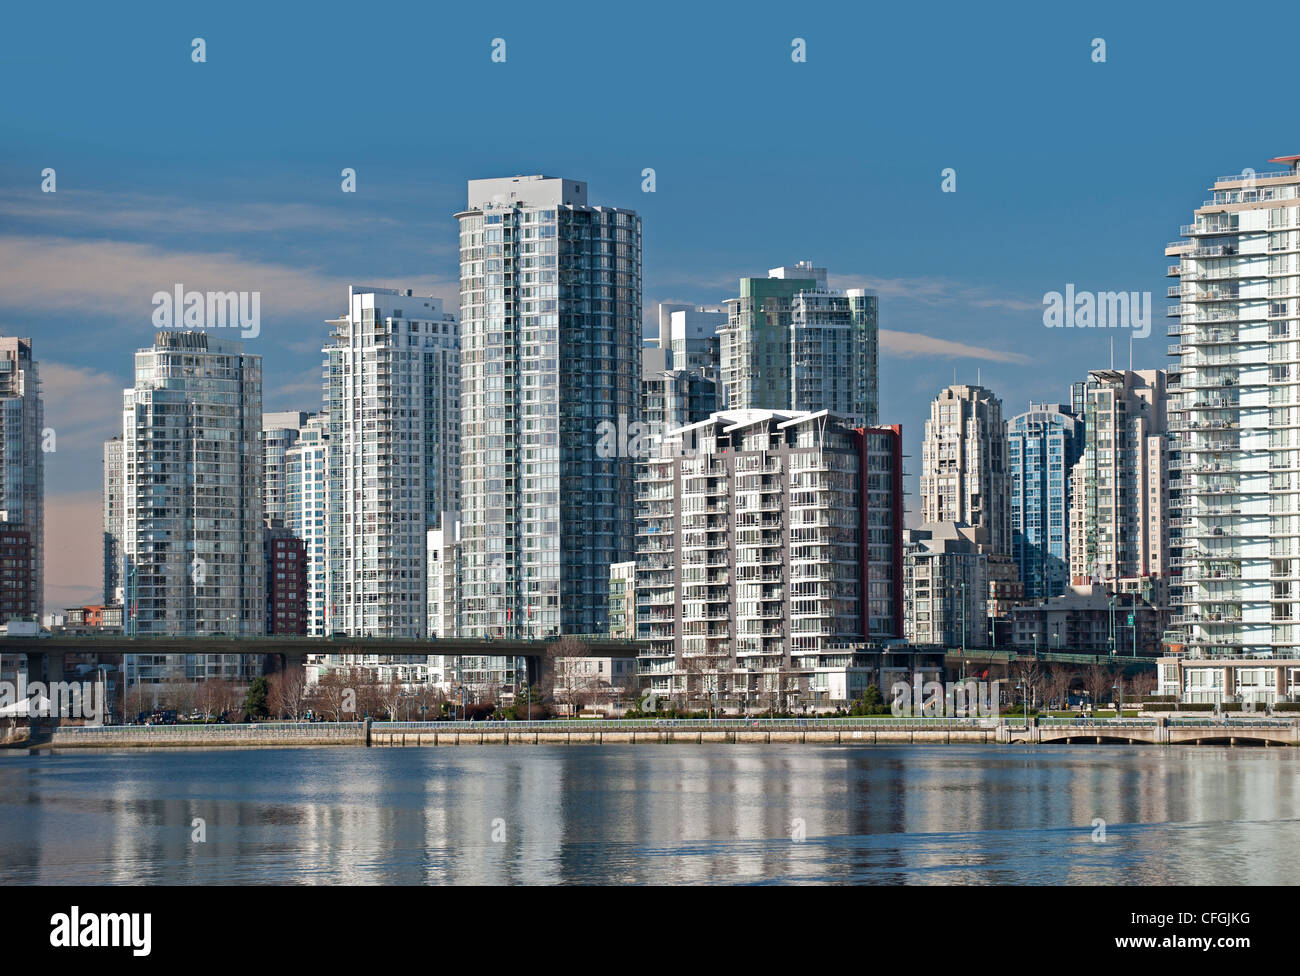 Modern luxury apartment buildings by the sea Stock Photo